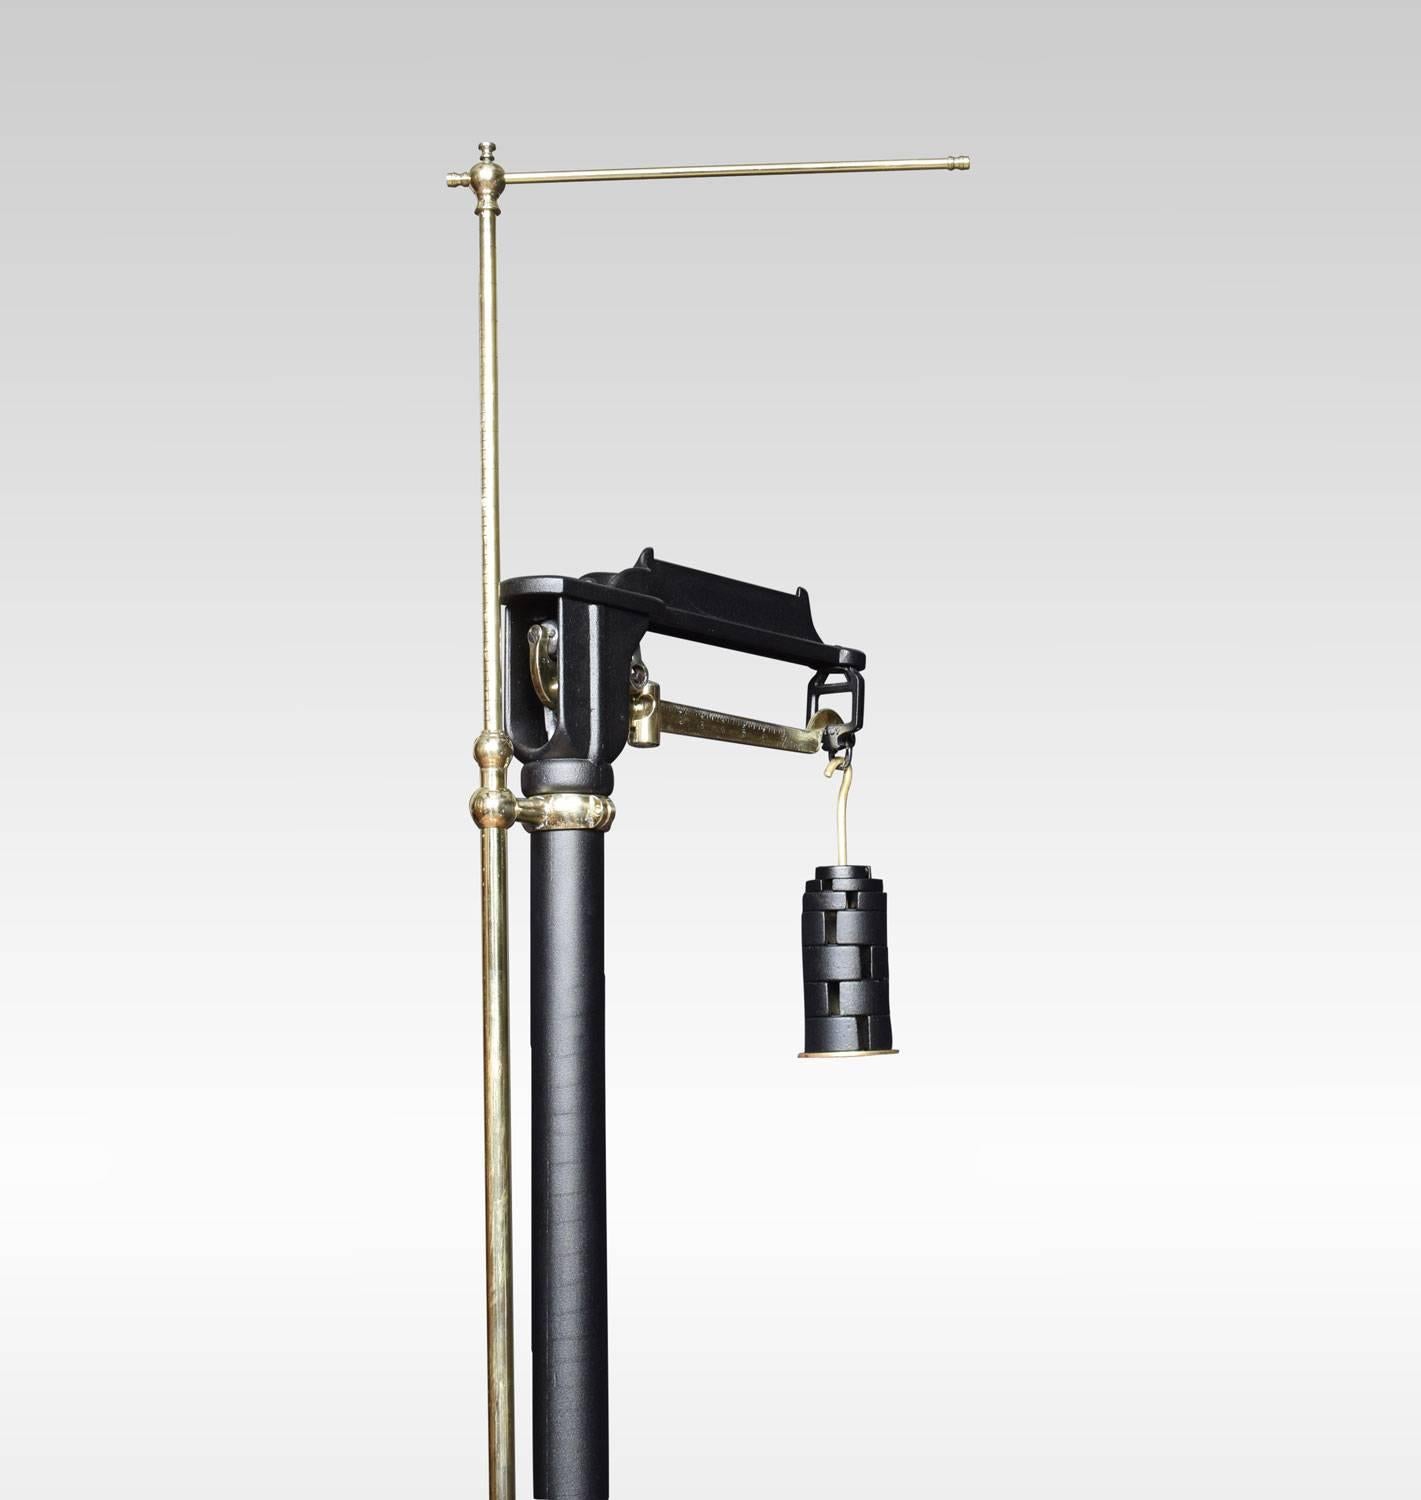 Fairbanks doctors scales in black with brass adjustable measuring stick, and cast iron pressure plate. Retaining there original weights.
Dimensions
Height 61.5 Inches
Width 11.5 Inches
Depth 22 Inches